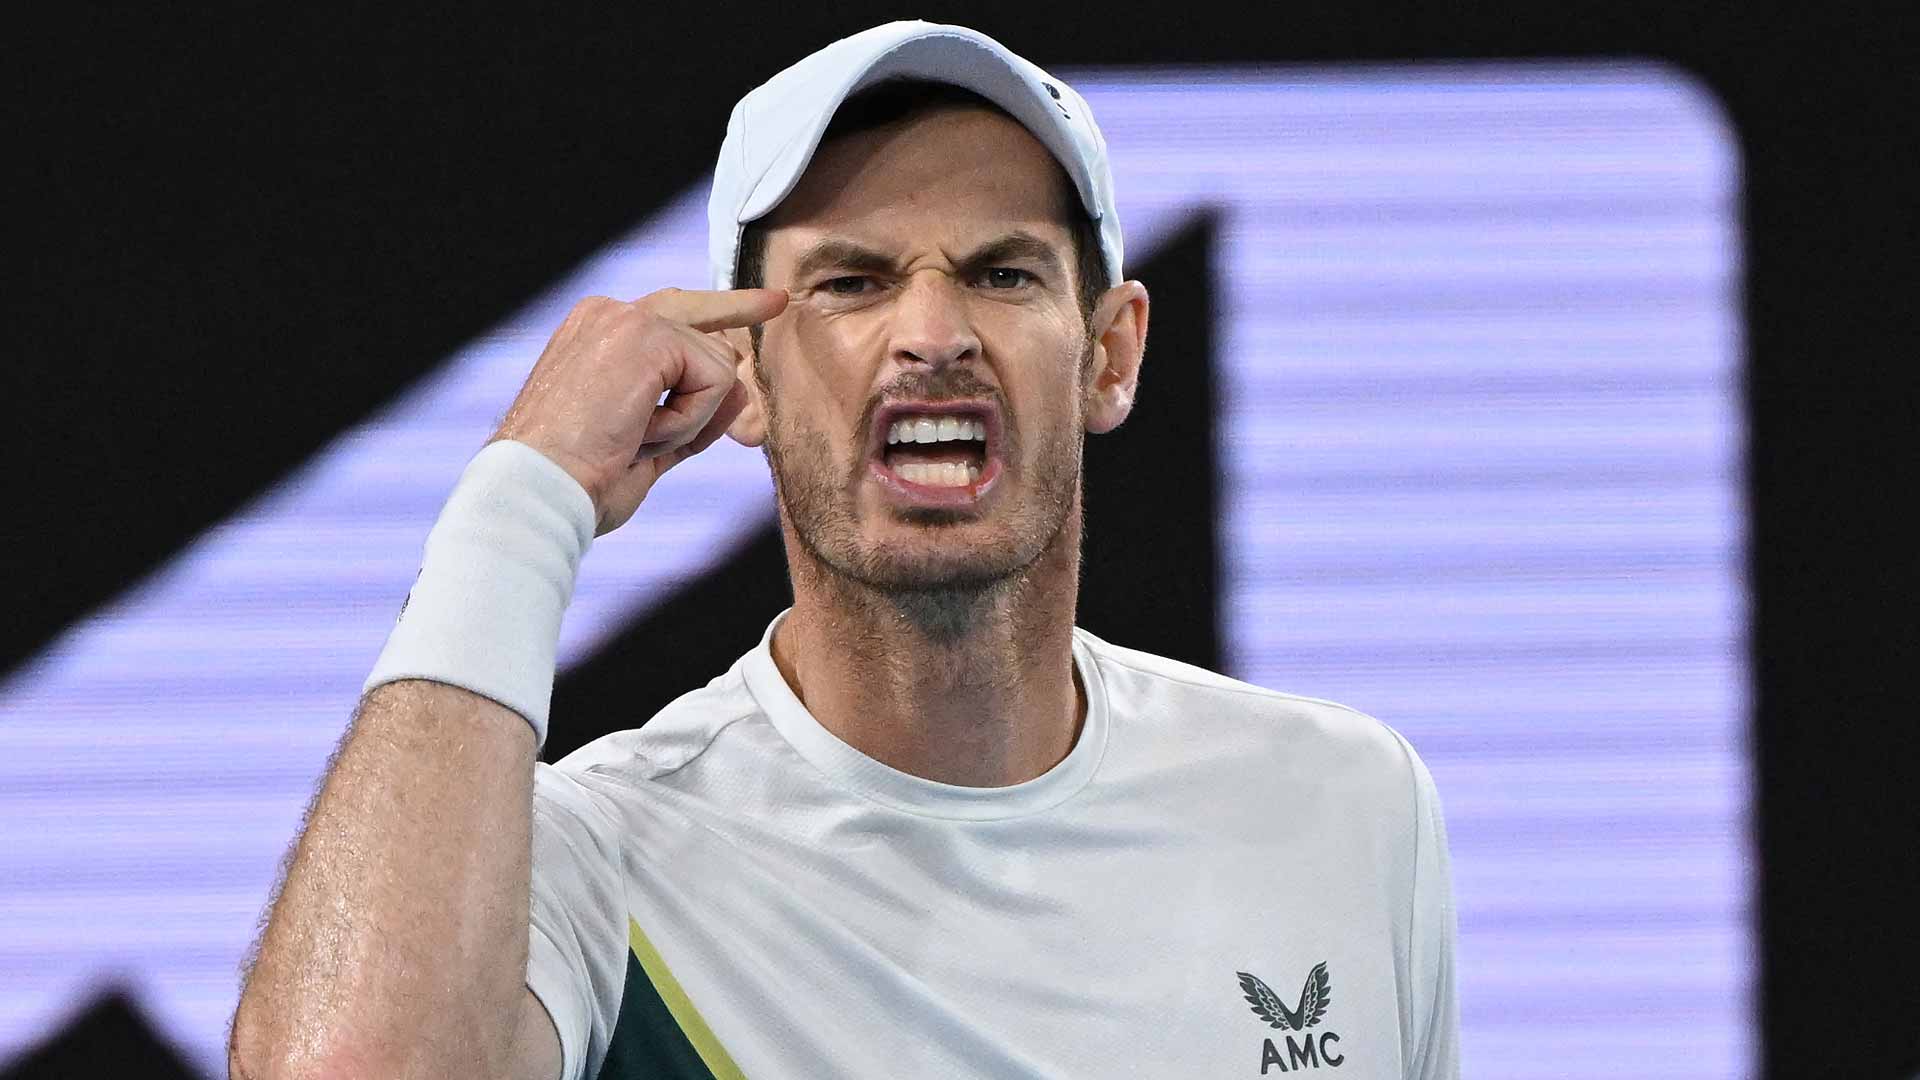 a href='https://www.atptour.com/en/players/andy-murray/mc10/overview'Andy Murray/a